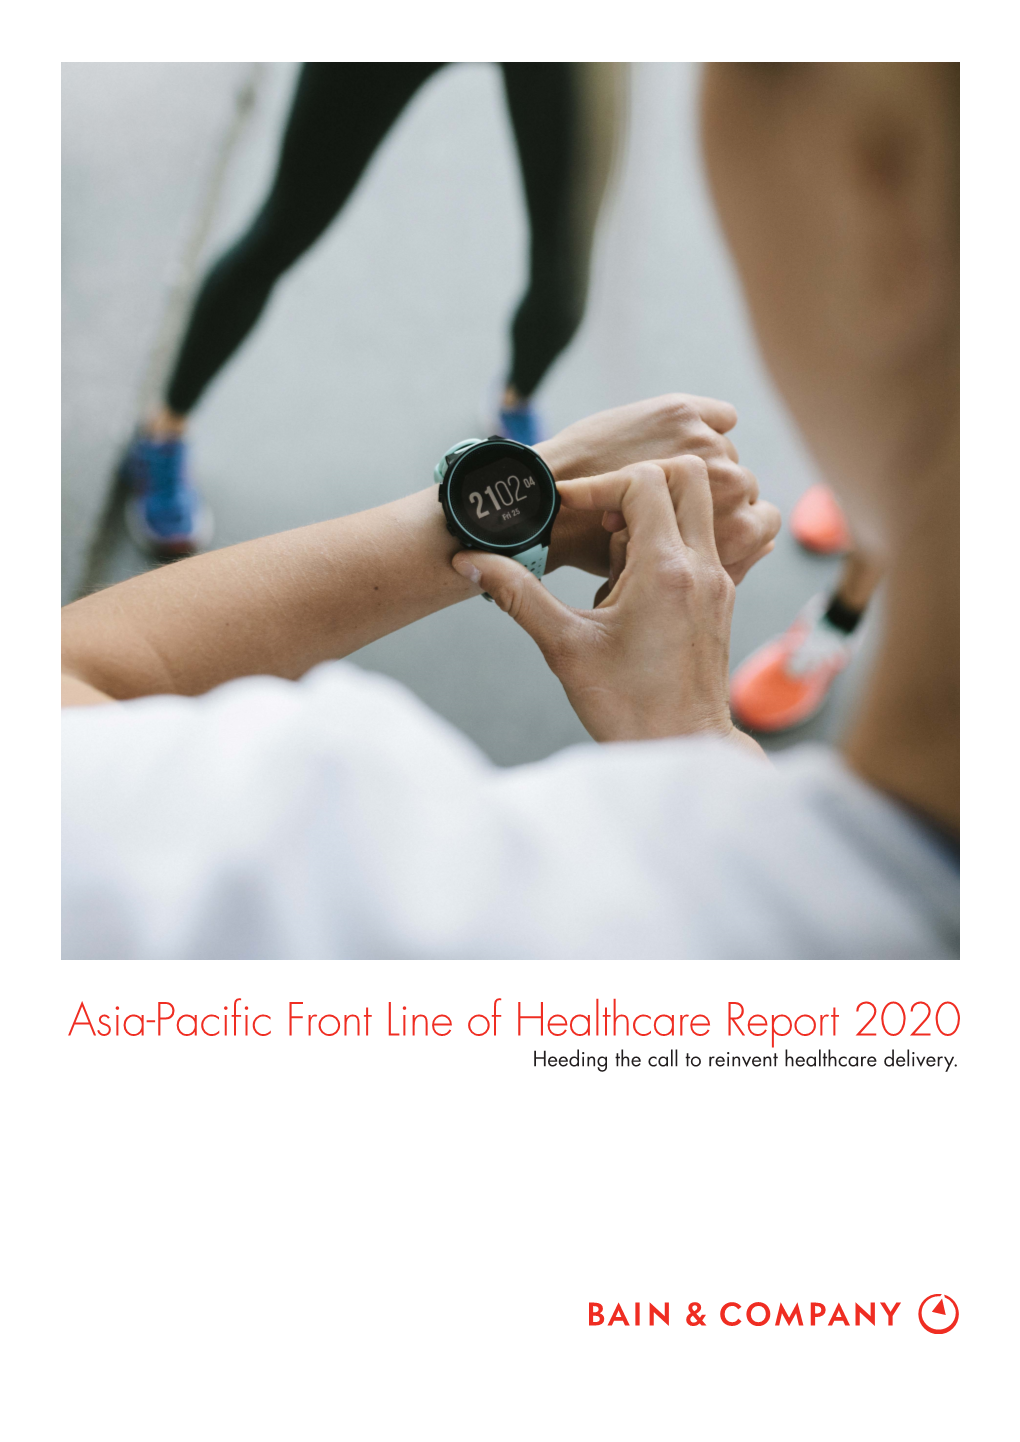 Asia-Pacific Front Line of Healthcare Report 2020 Heeding the Call to Reinvent Healthcare Delivery